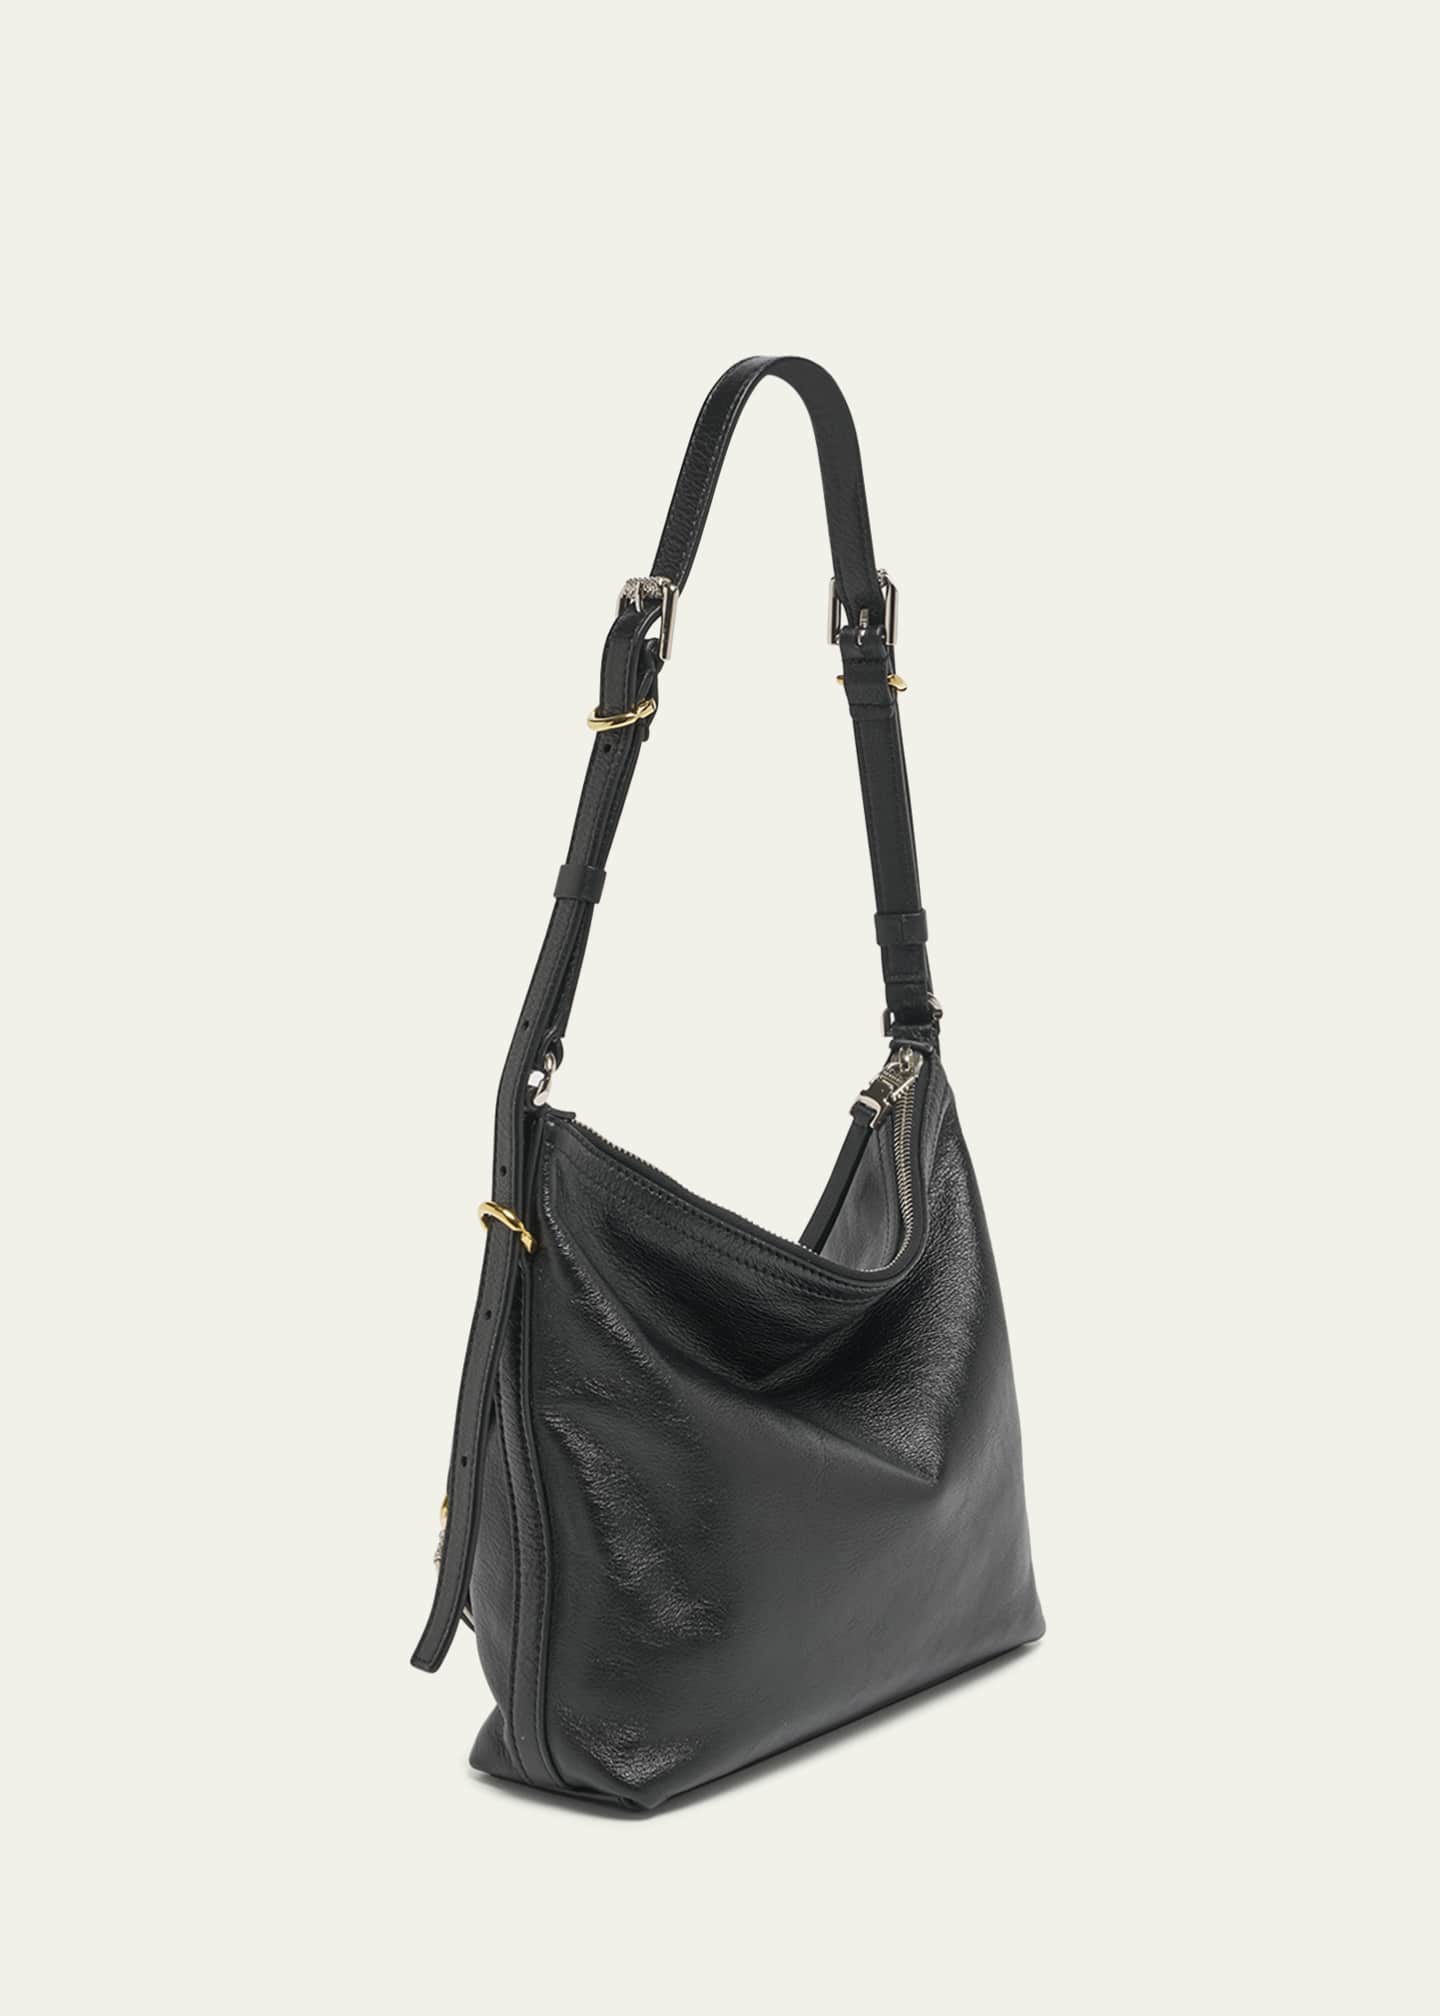 Givenchy Voyou Small Crossbody Bag in Tumbled Leather - Bergdorf Goodman